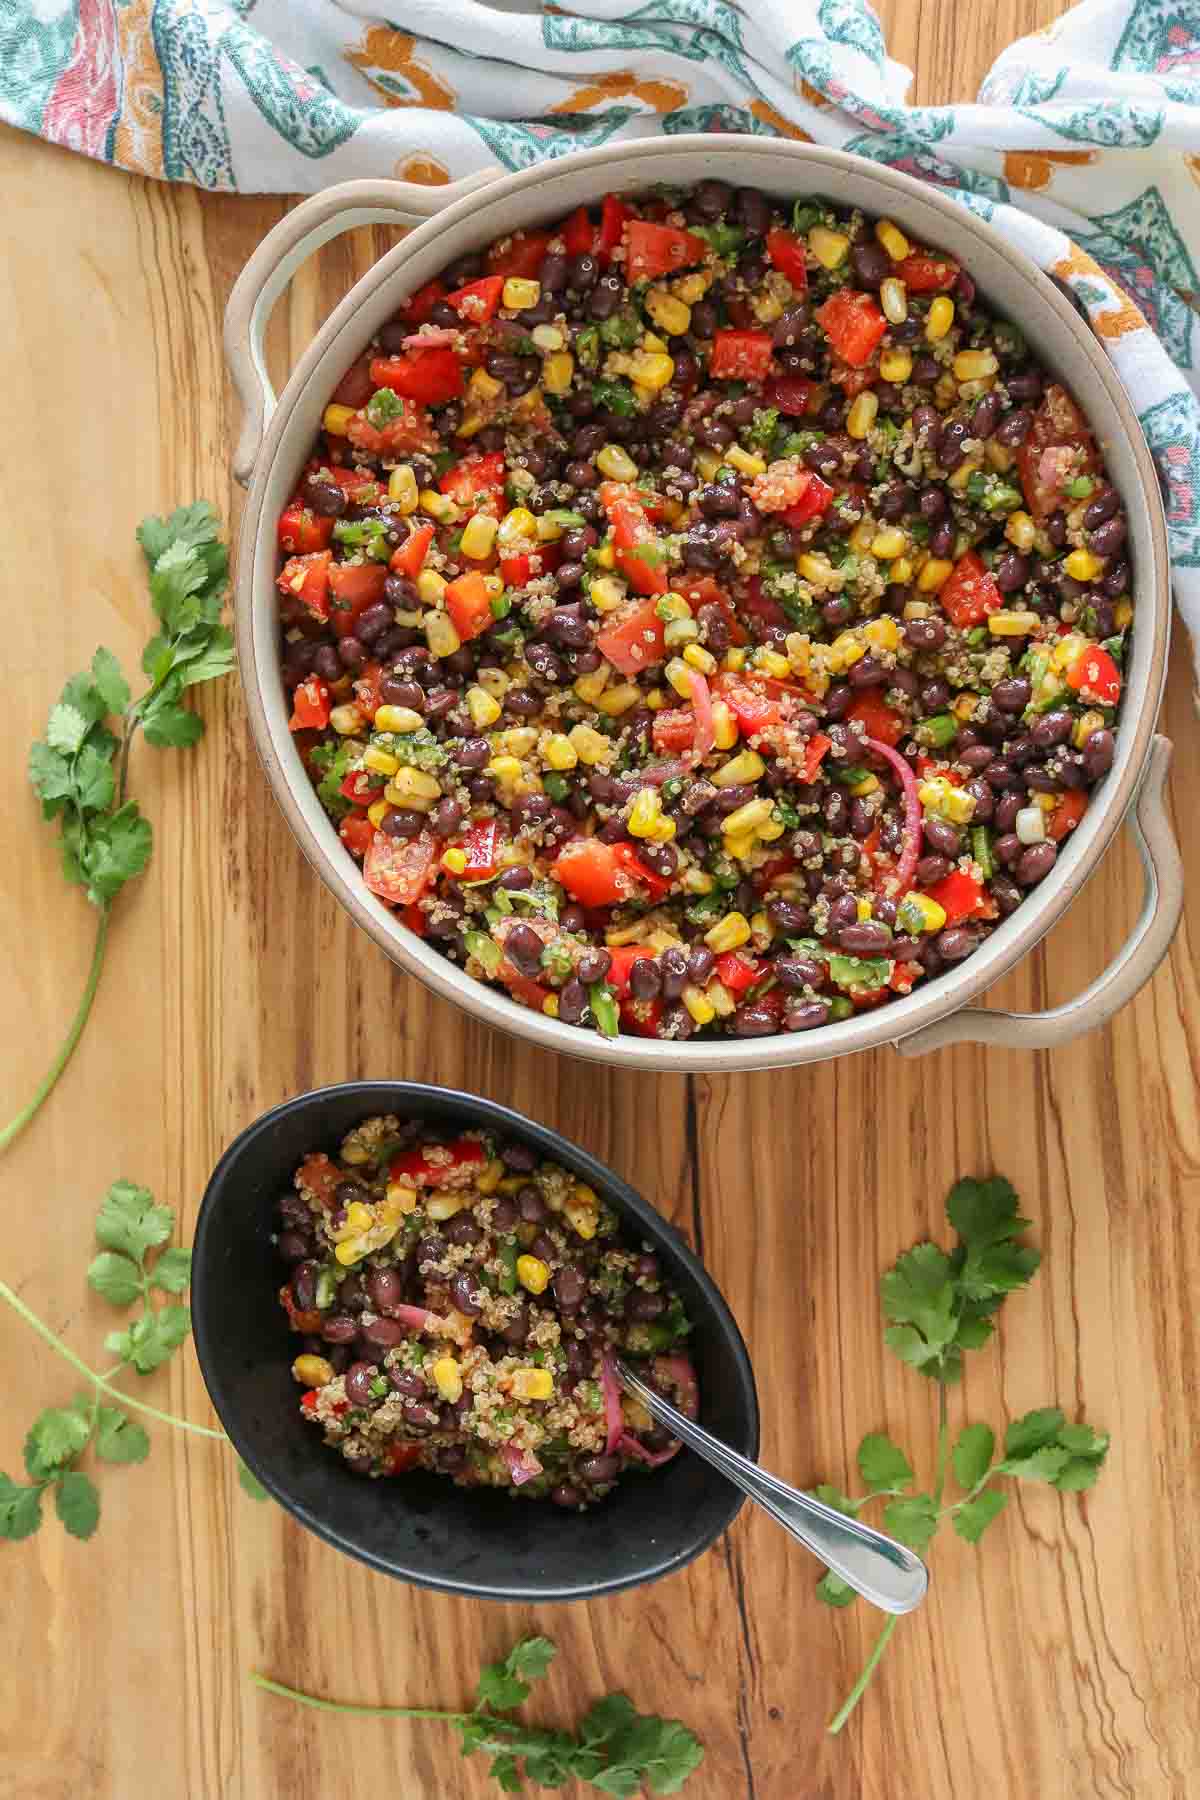 Corn and black bean quinoa salad, some in a serving dish and some in a small bowl.